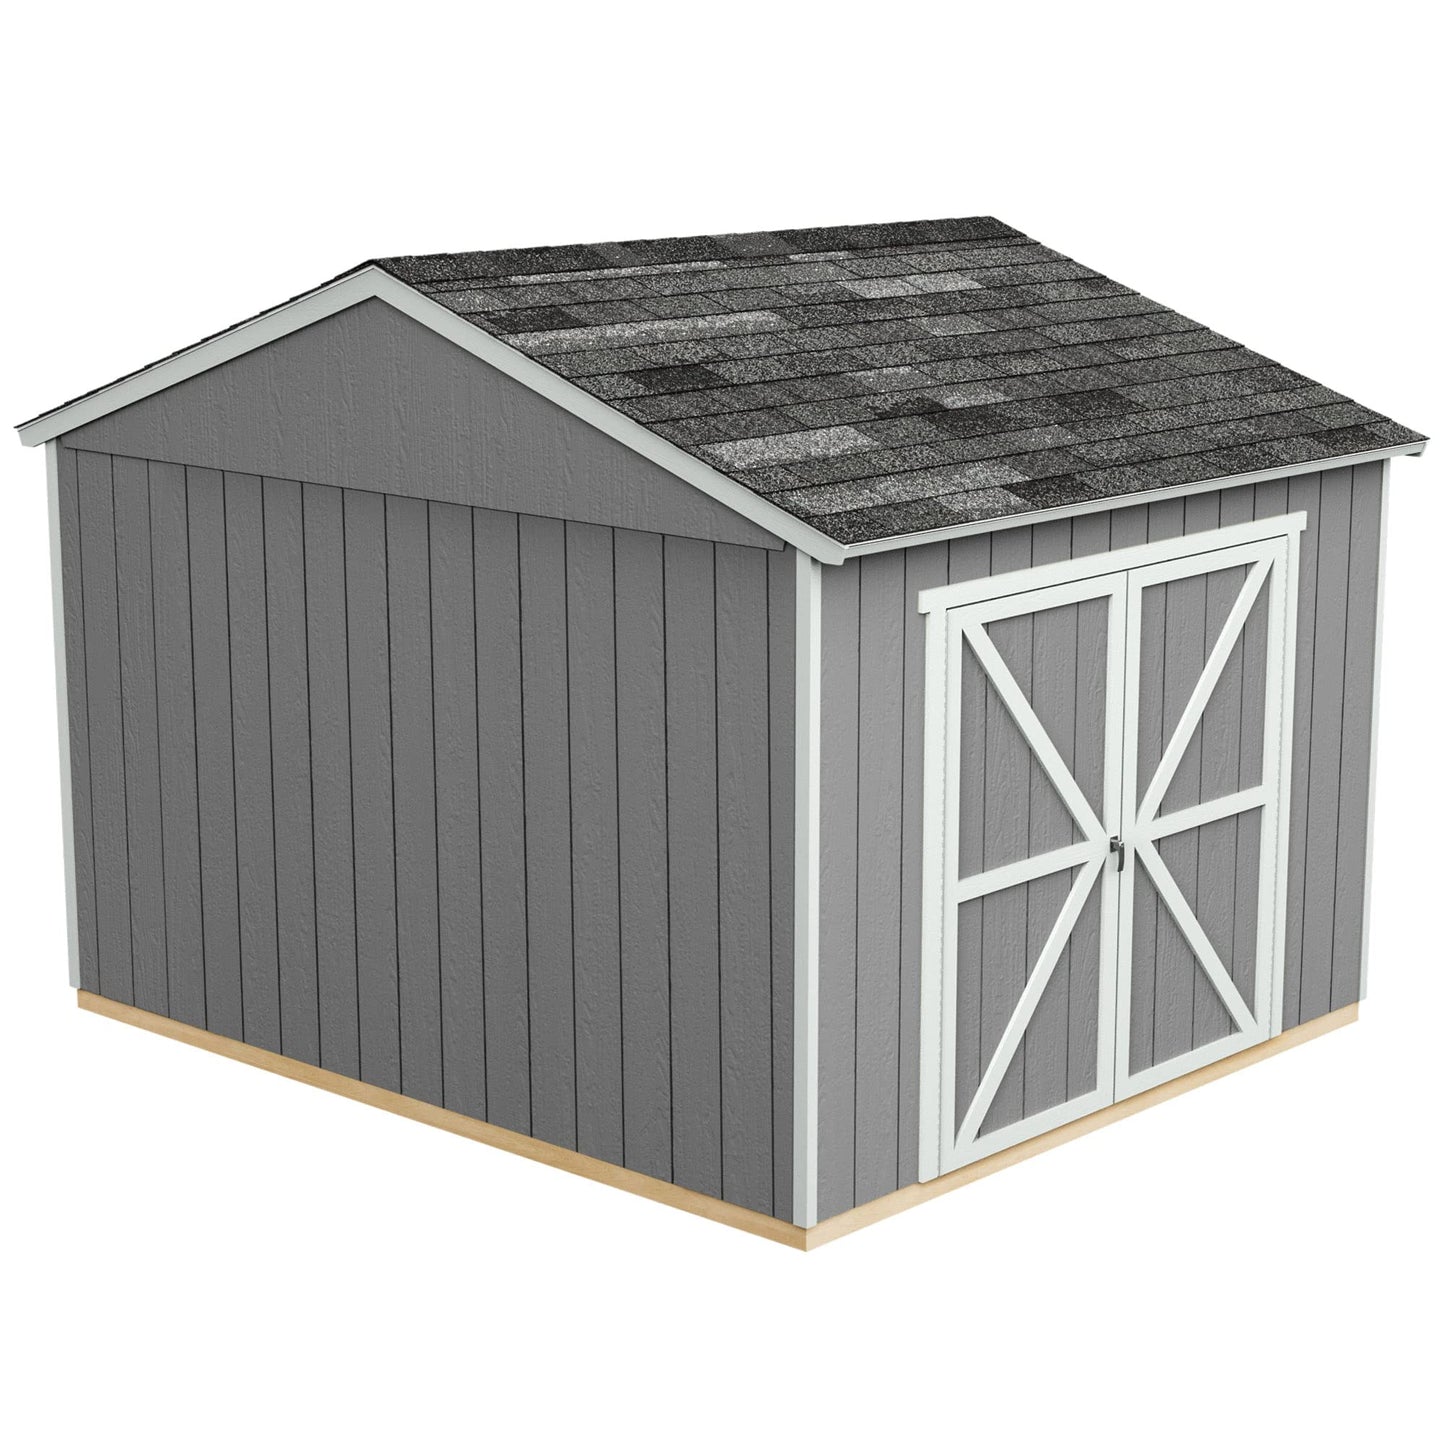 Handy Home Products Astoria 12x12 Do-It-Yourself Wooden Storage Shed Brown Without Floor